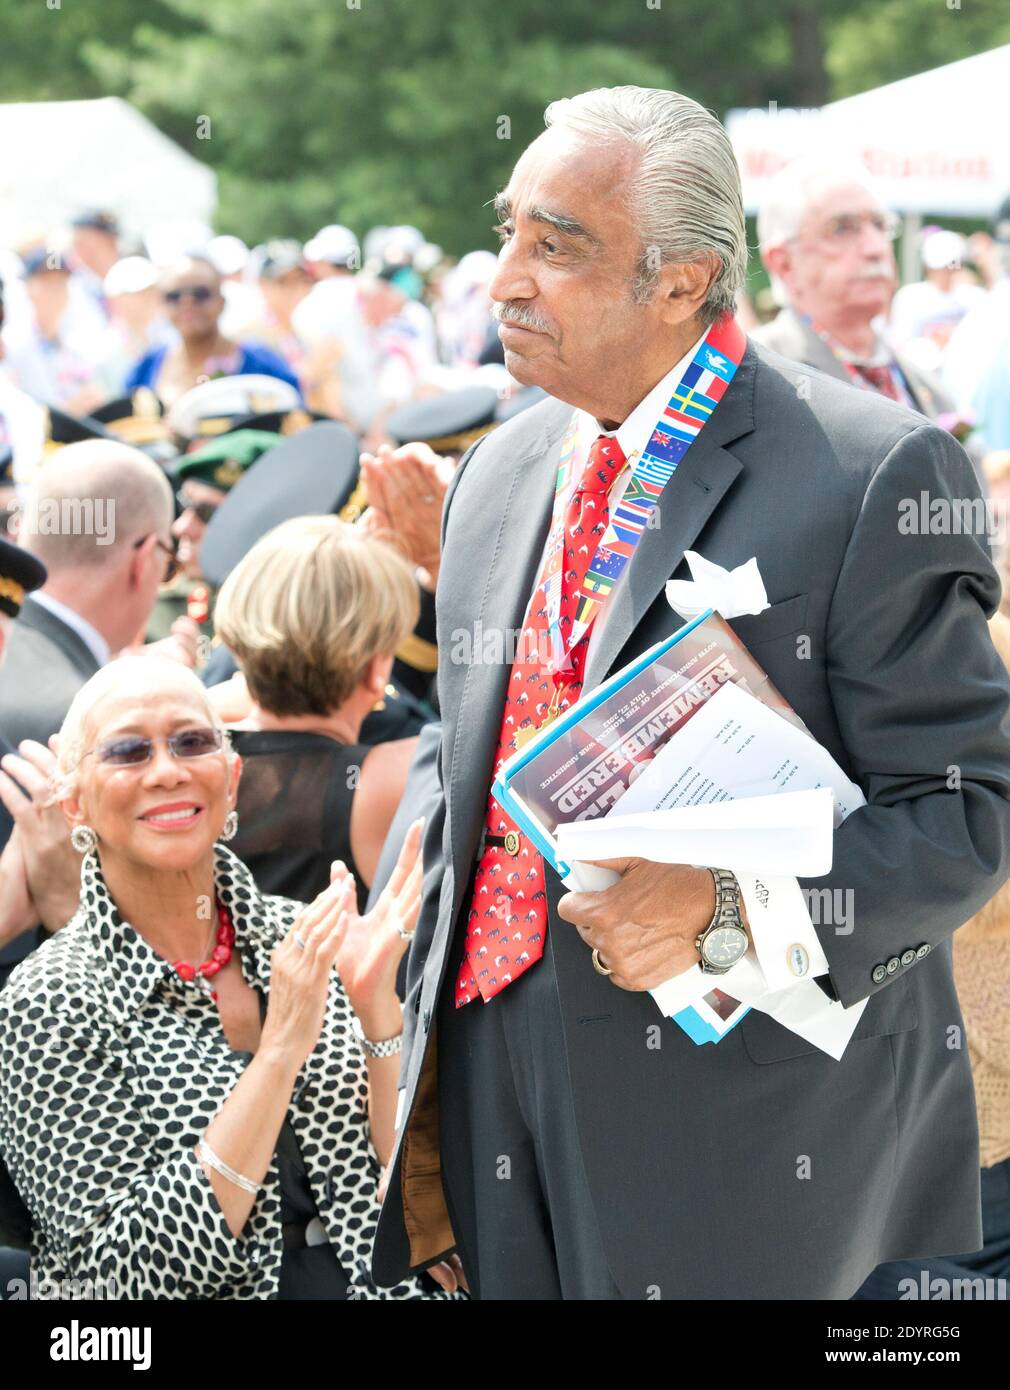 United States Representative Charlie Rangel (Democrat of New York) stands when he is recognized as part of a group of Korean War Veterans are recognized during U.S. President Barack Obama's remarks marking the 60th Anniversary of the Korean War Armistice at the Korean War Veterans Memorial in Washington, D.C., USA, on Saturday, July 27, 2013. Photo by Ron Sachs/Pool/ABACAPRESS.COM Stock Photo